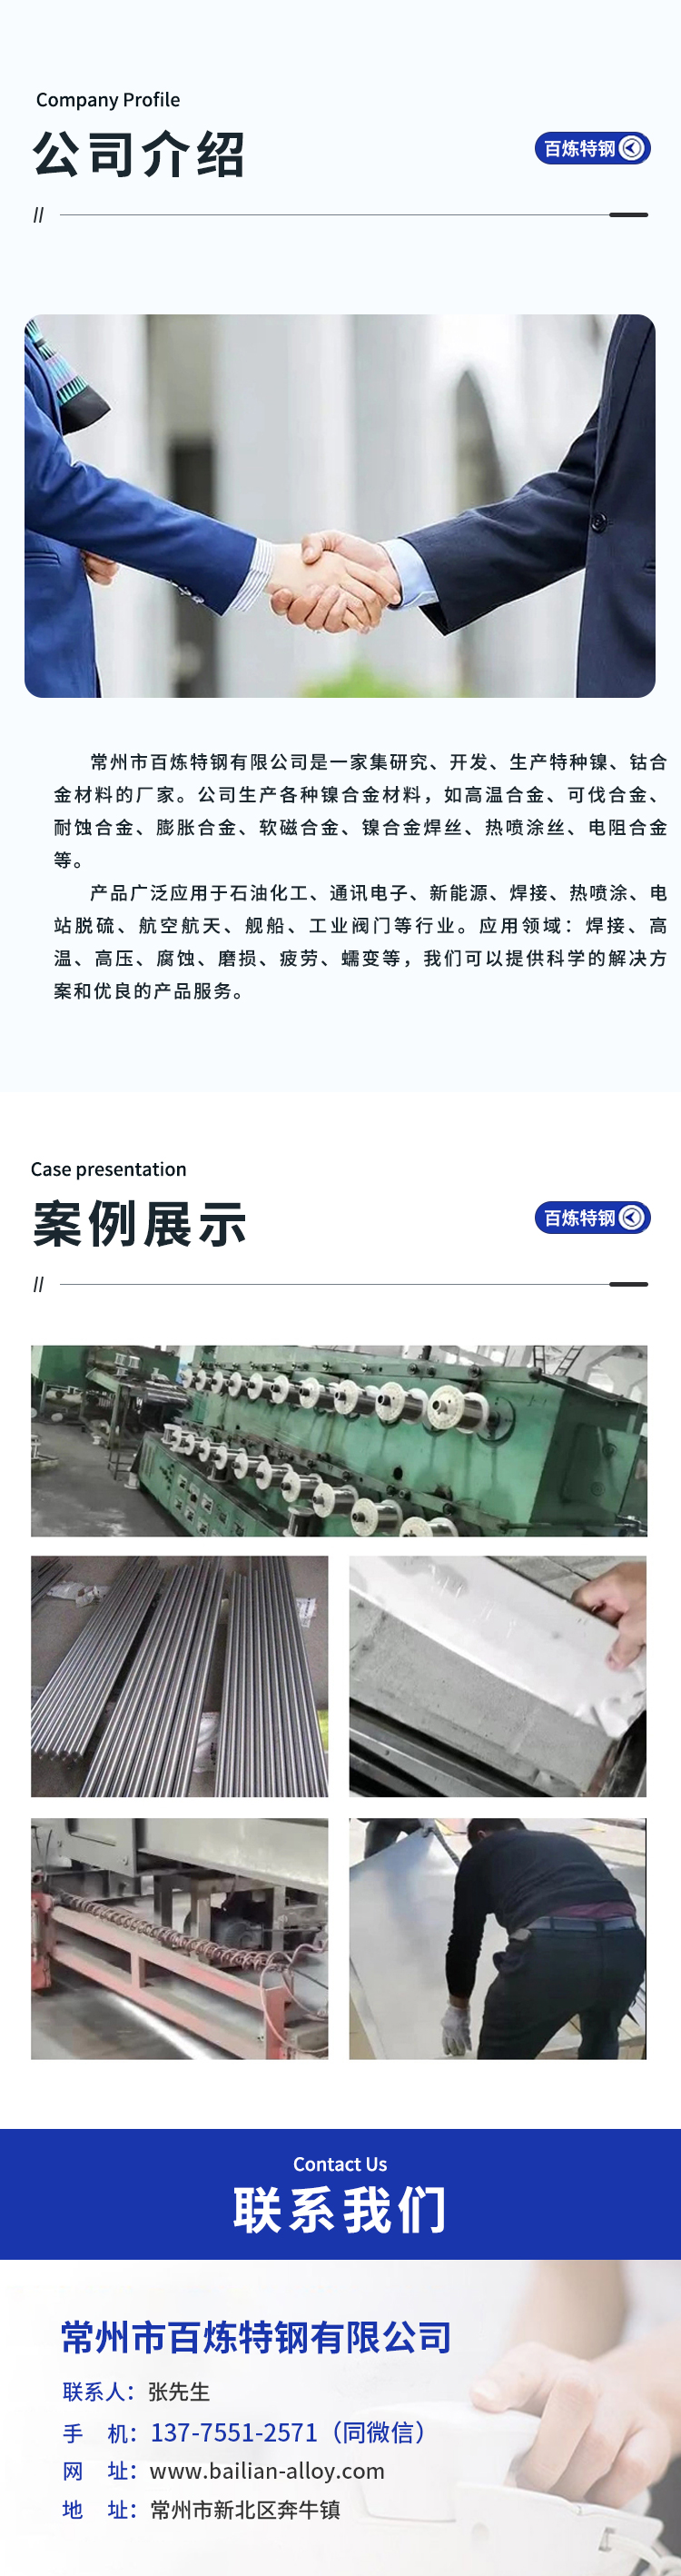 Invar alloy, low expansion alloy, plasticity, toughness, high strength, and low hardness